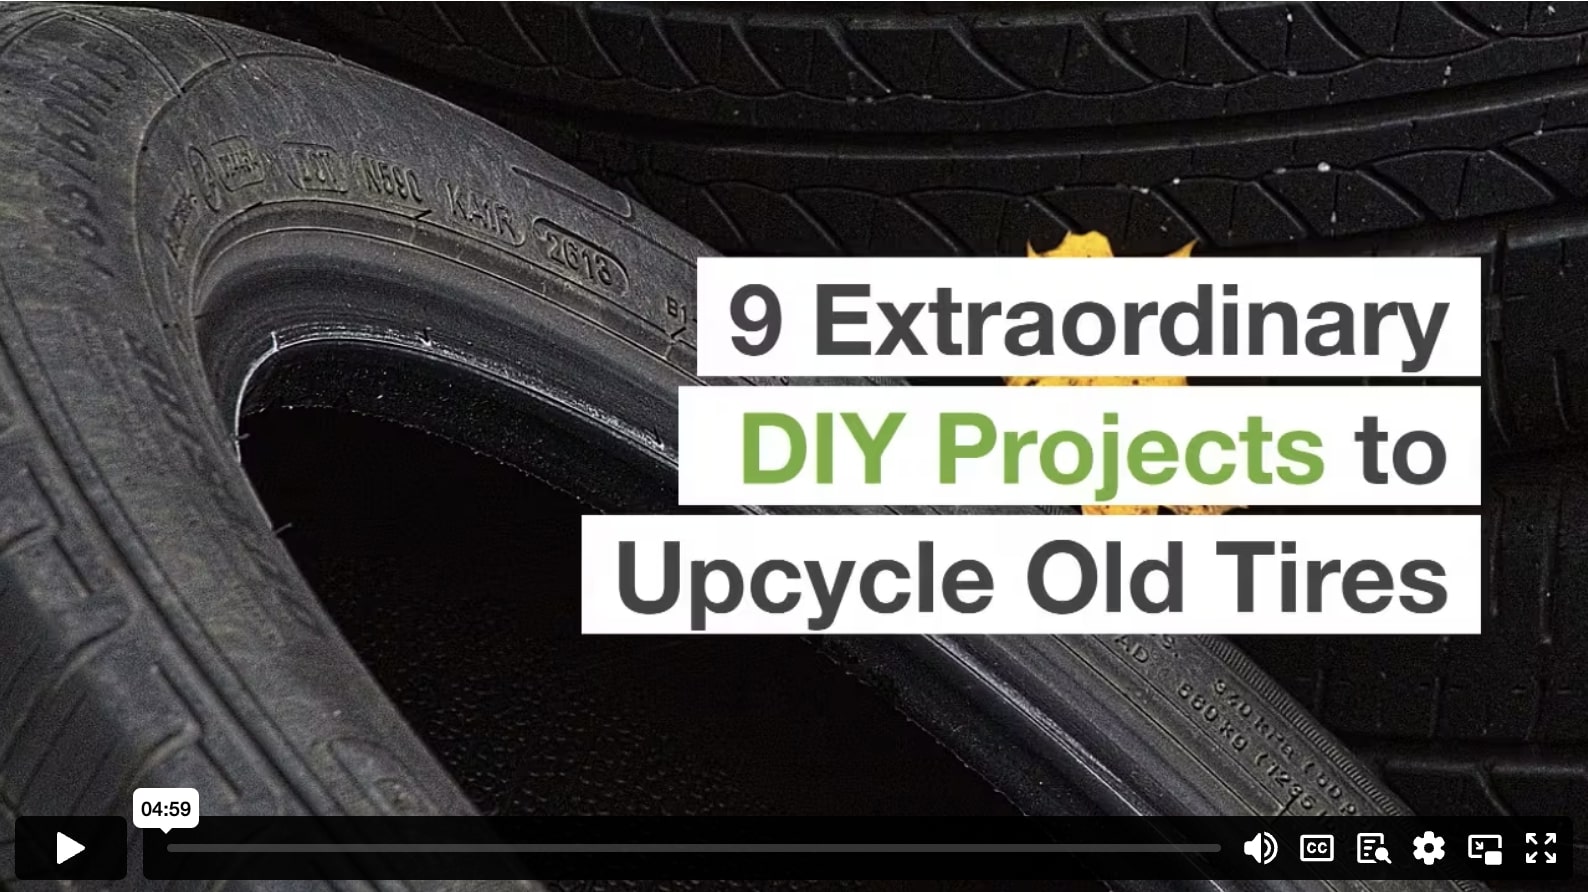 9 Extraordinary DIY Projects to Upcycle Old Tires